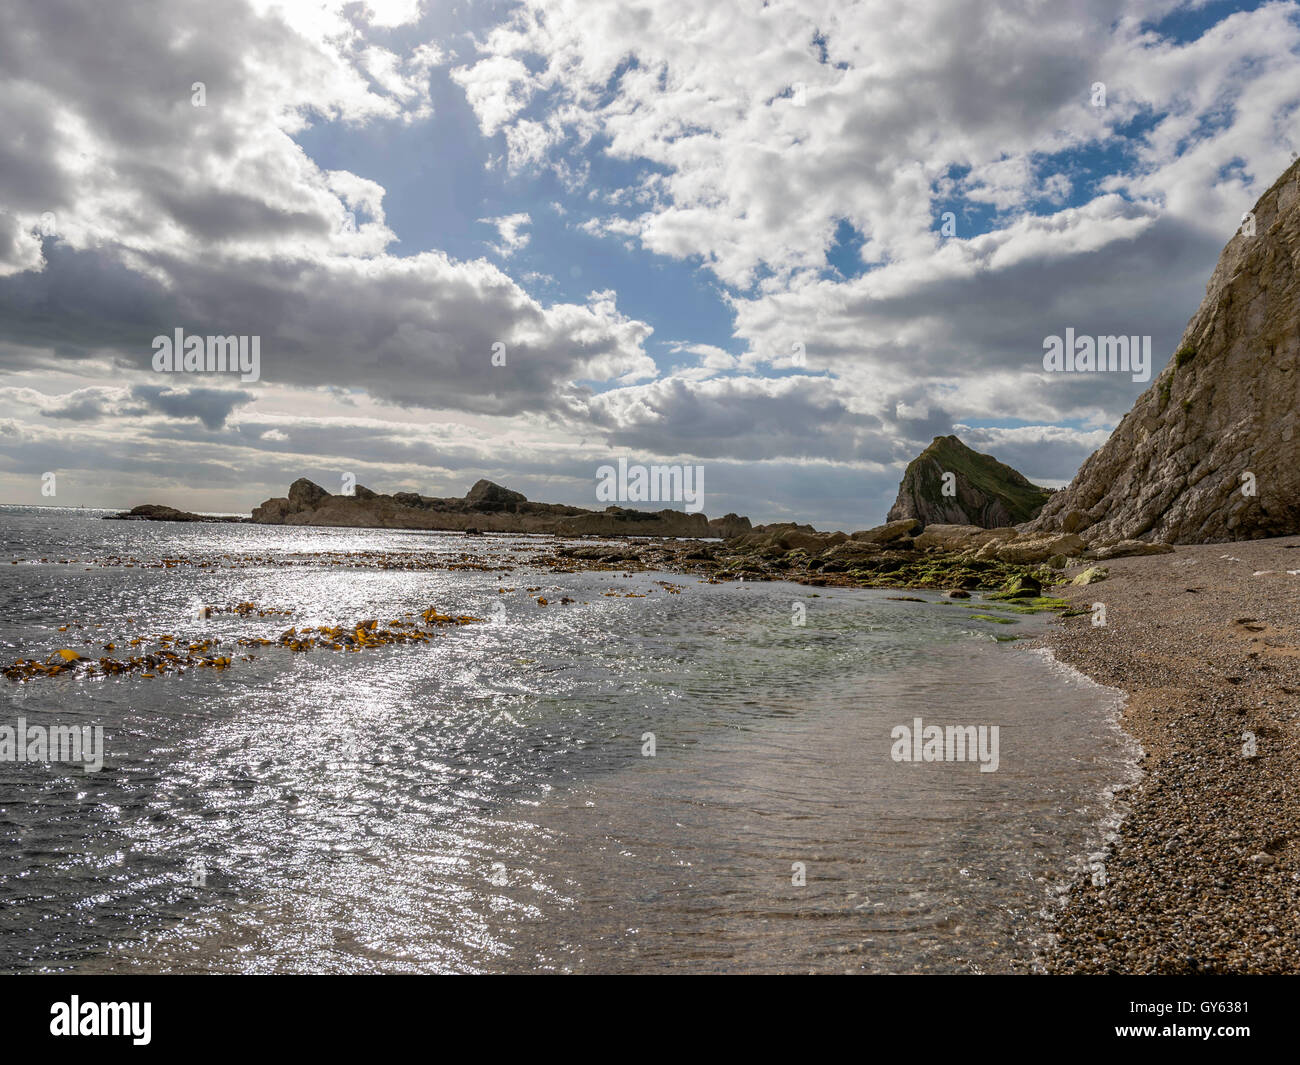 Landscape depicting the rocky Man O'War shoreline on fine summer day with Durdle Door headland in the background. Stock Photo